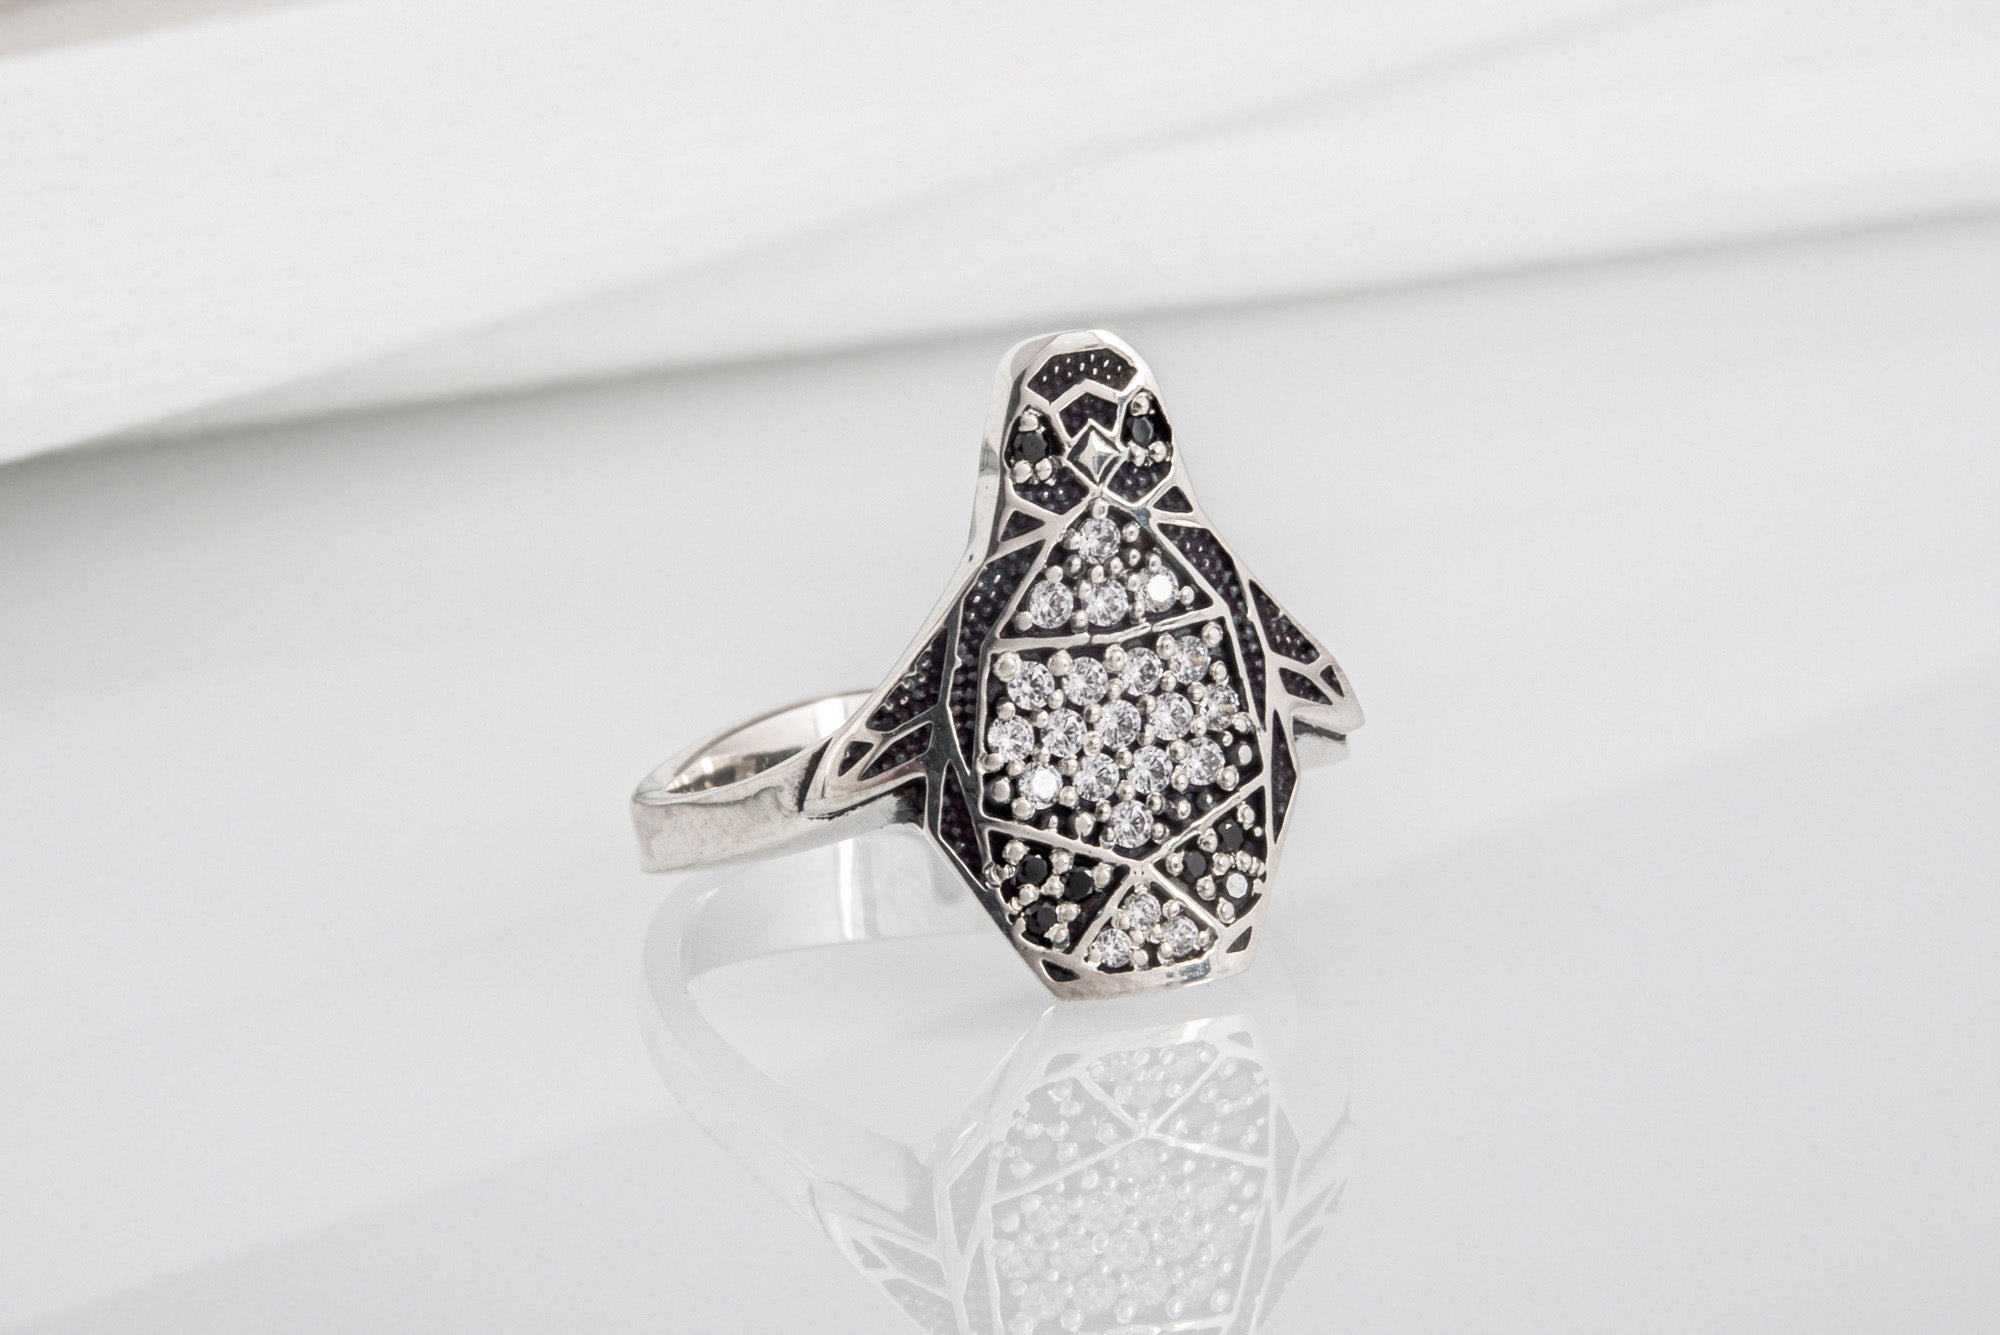 Handcrafted 925 silver Pinguin ring with clear gems, unique animal fashion jewelry